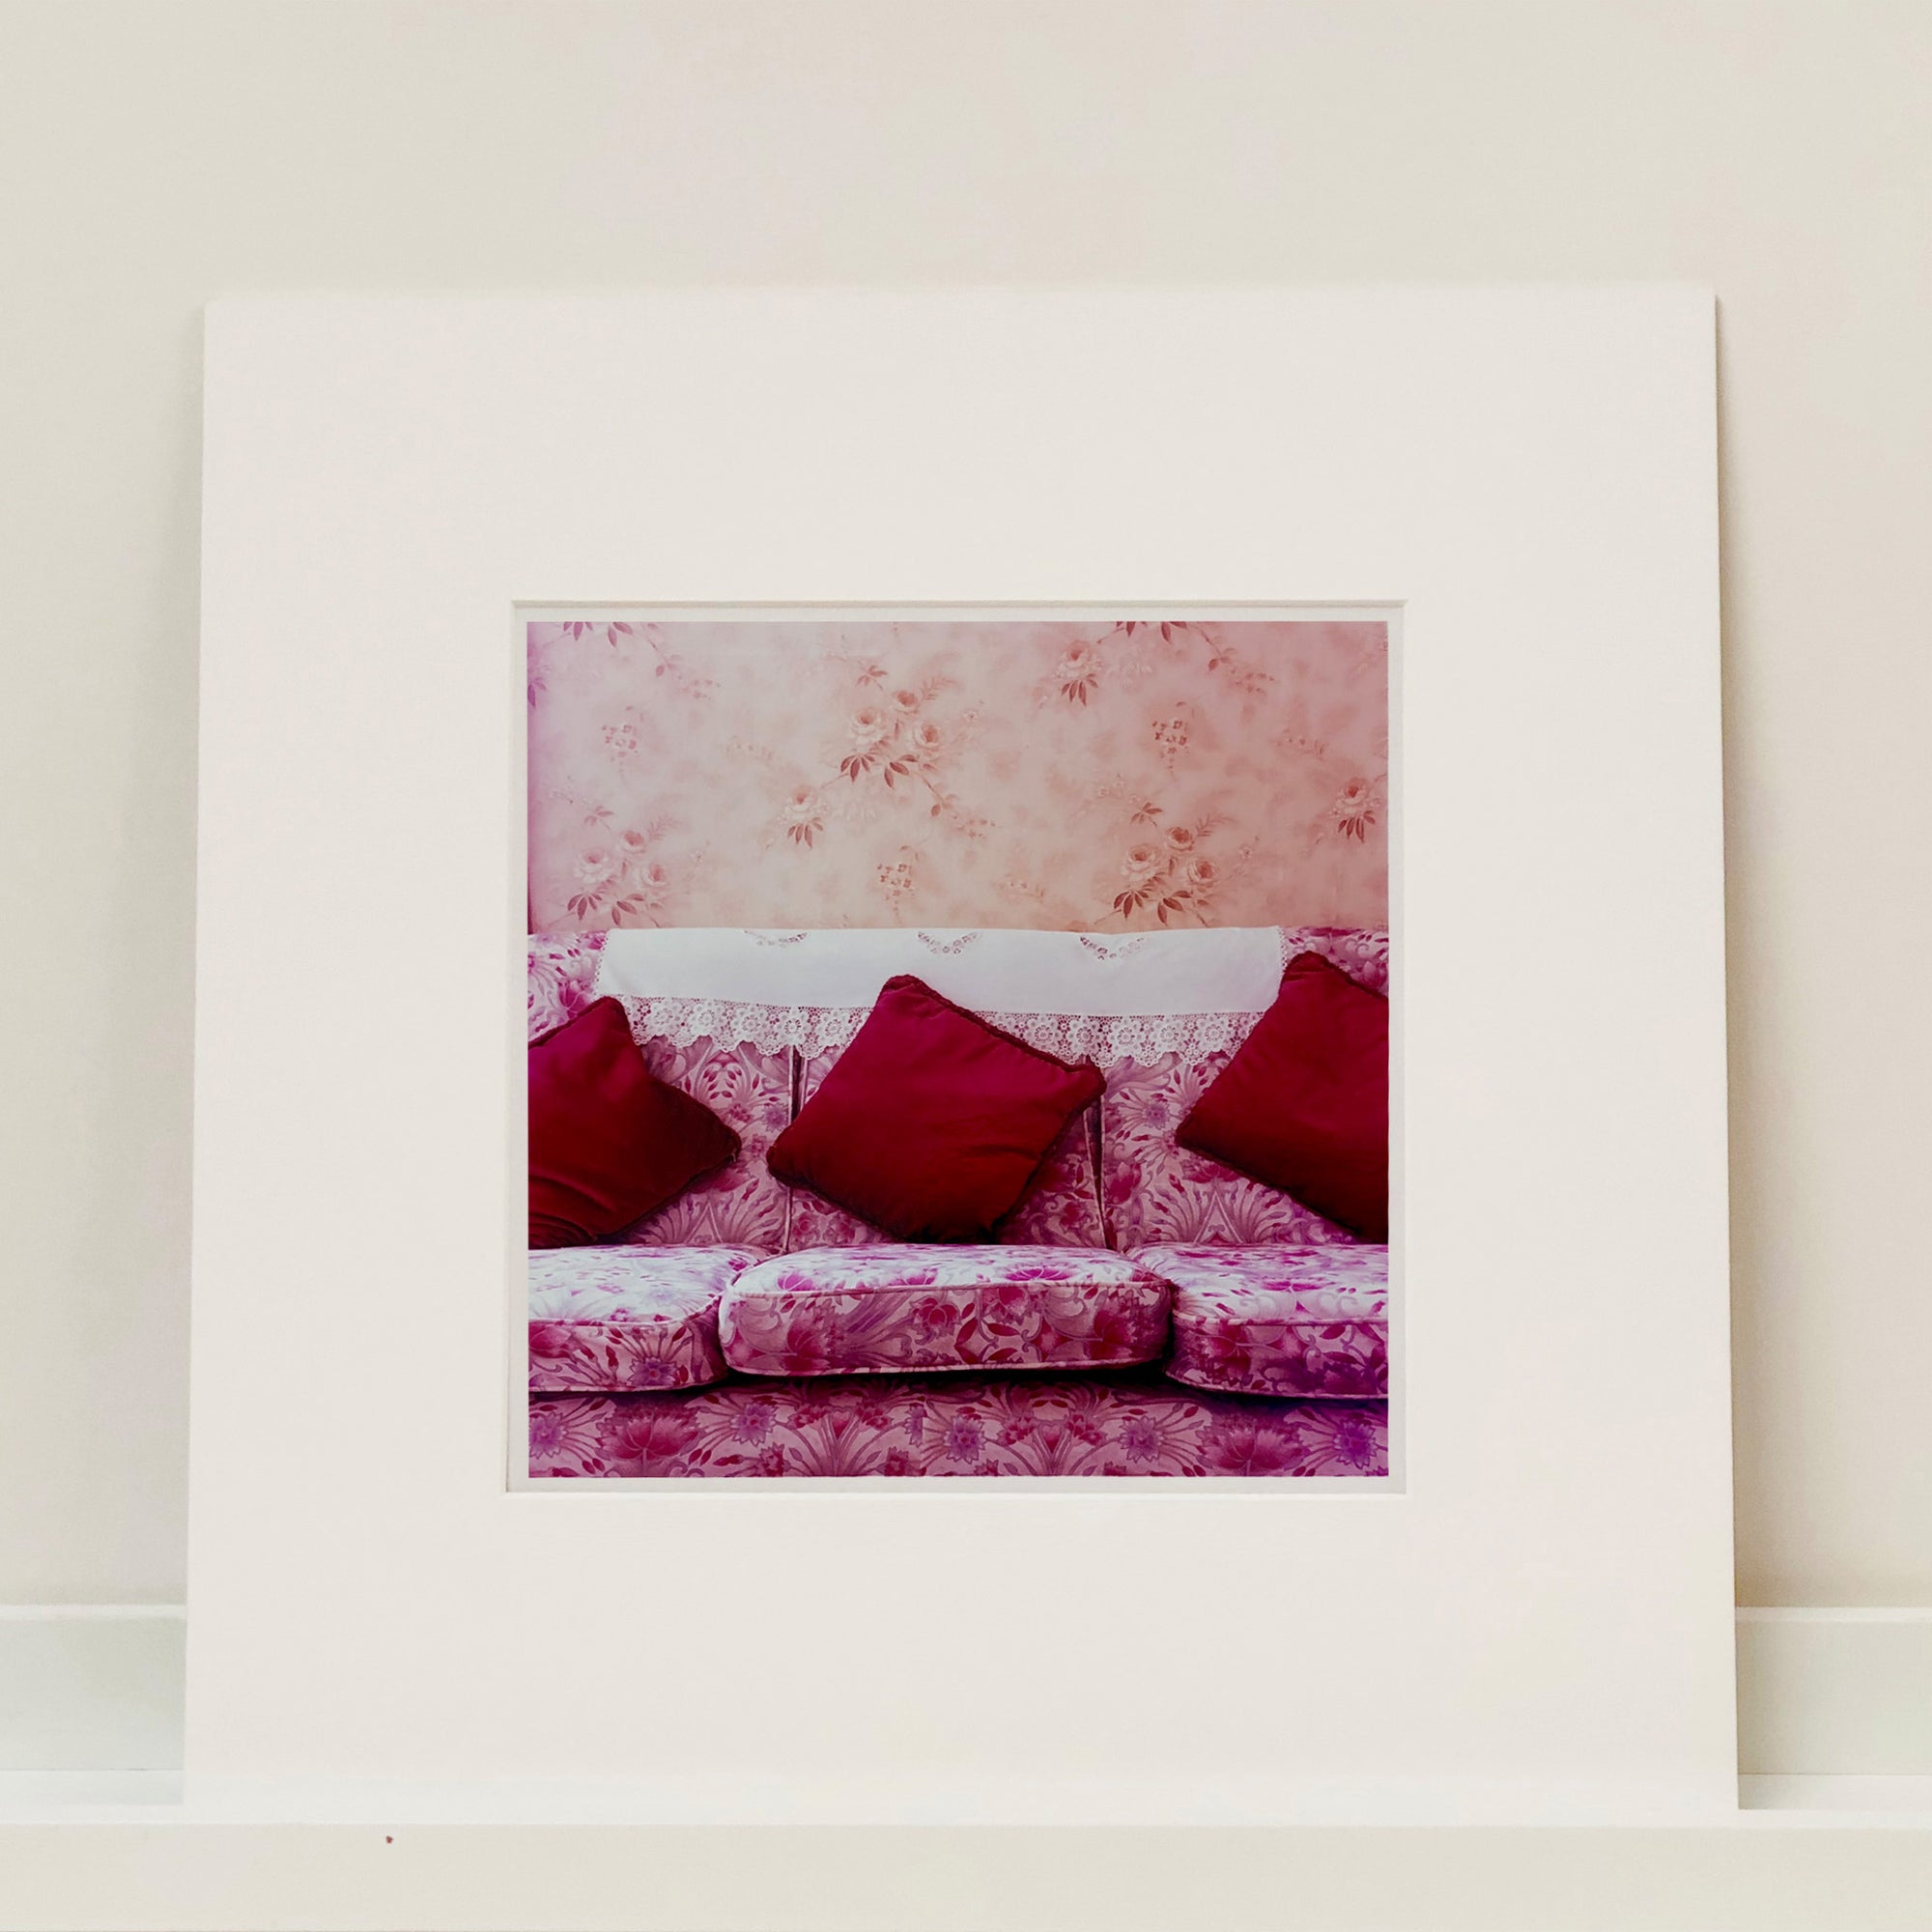 Photograph by Richard Heeps. A purple flowered sofa sits with three red cushions neatly placed and a crocheted antimacassar.  The background is a contrasting peach flowered wallpaper.  